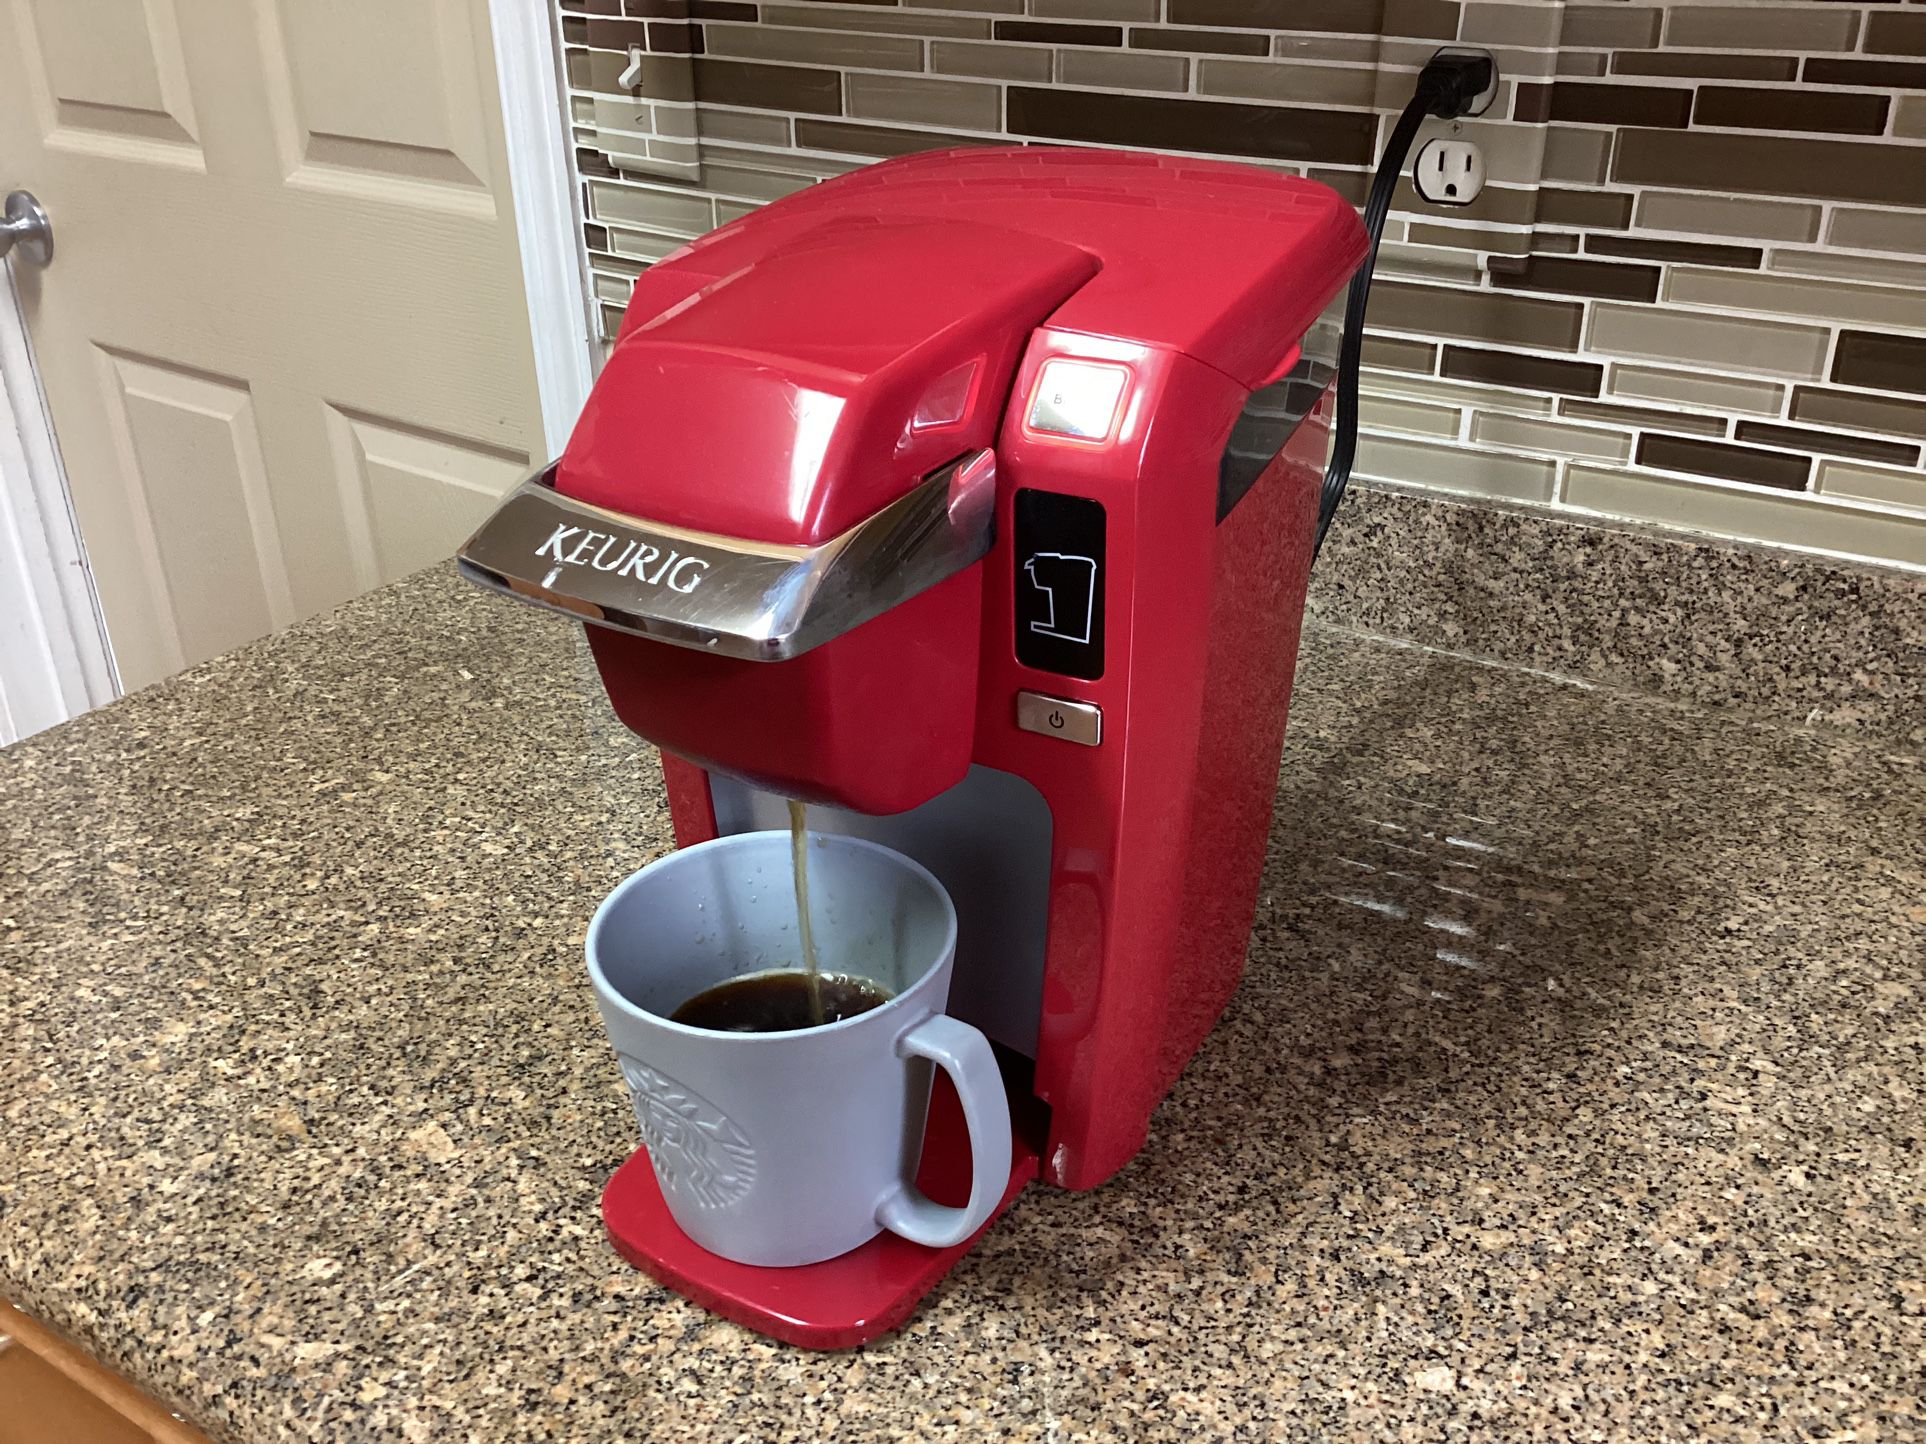 Keurig K10 Mini plus Coffee Maker, Red, Cleaned and Descaled +